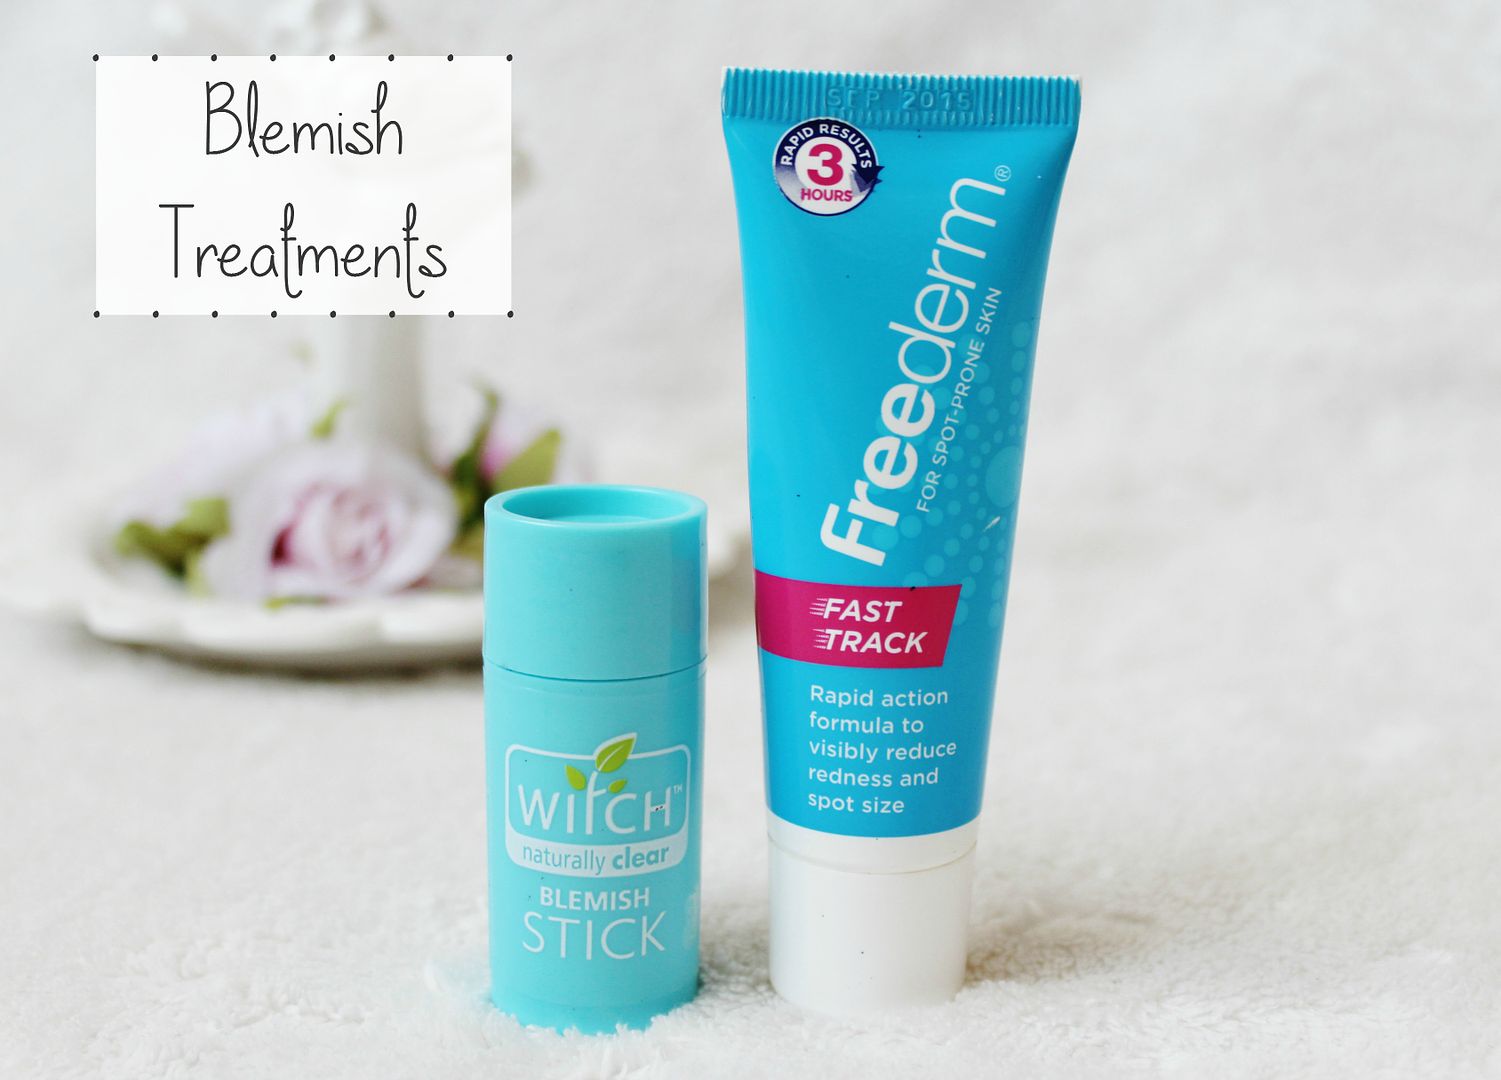 Dry-Senstive-Skin-Care-Routine-2015-Witch-Naturally-Clear-Blemish-Stick-Freederm-Fast-Track-Treatment-Belle-Amie-UK-Beauty-Fashion-Lifestyle-Blog